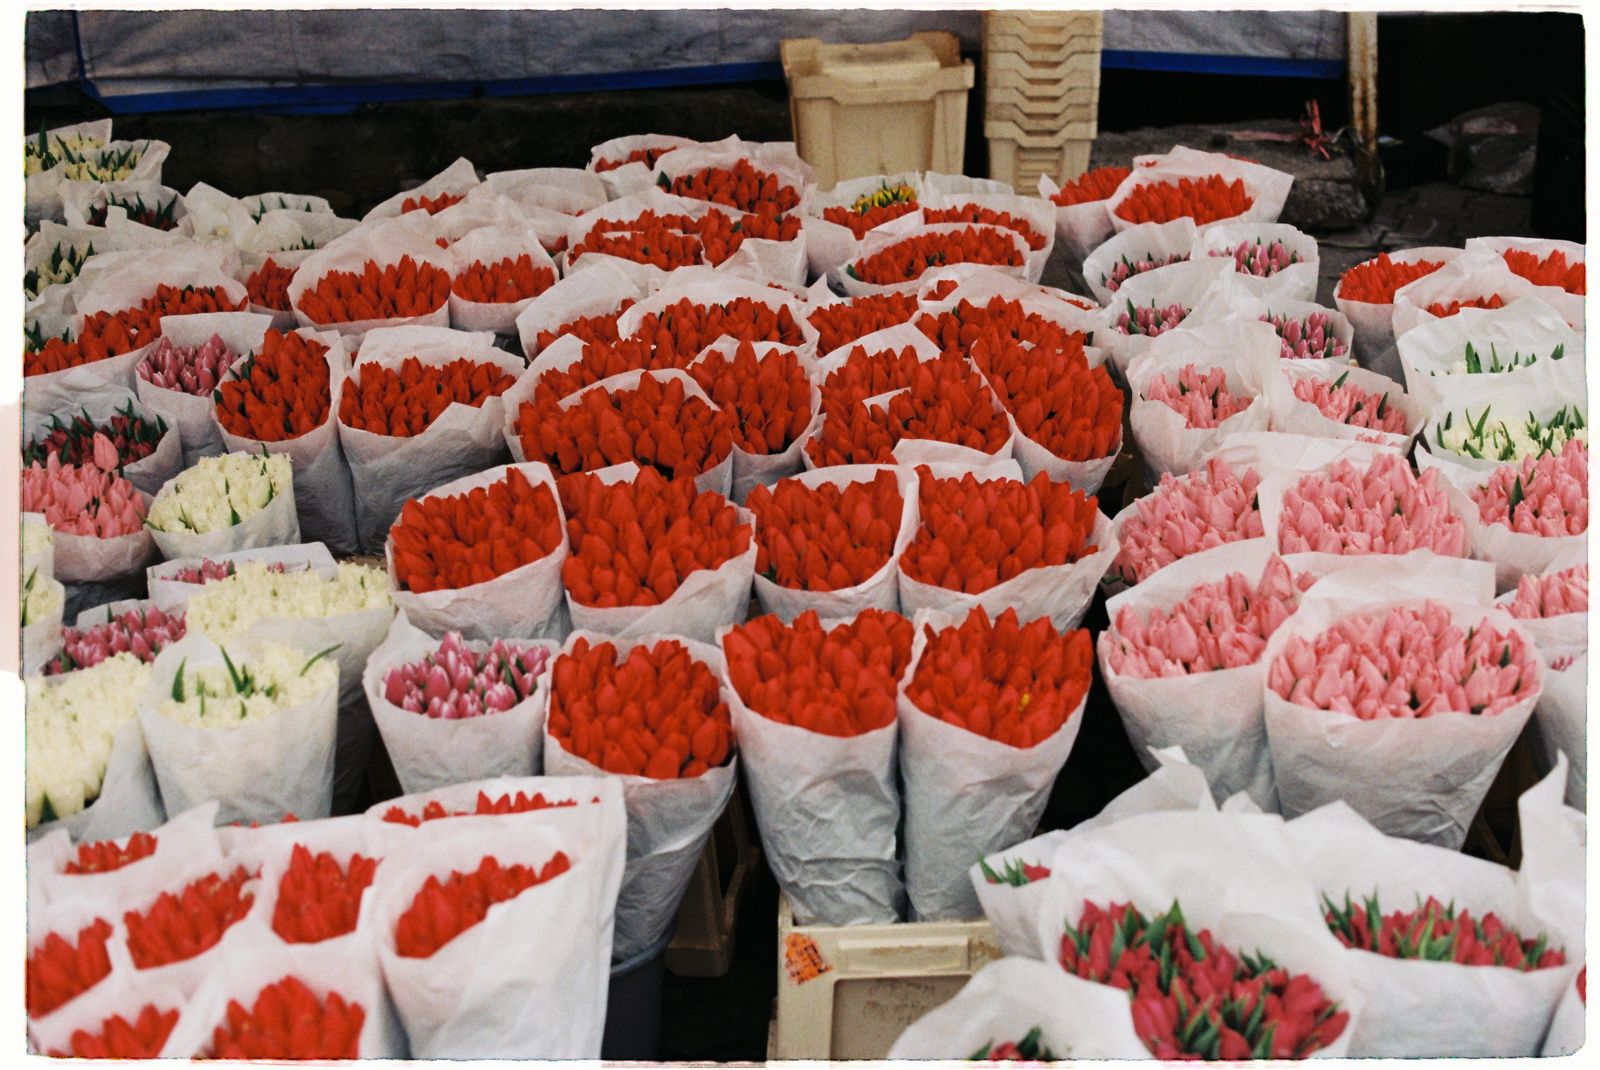 © Denise Lobont - Flower market was full of flowers during the 8th of March 2020 when Romania celebrates Mother's day